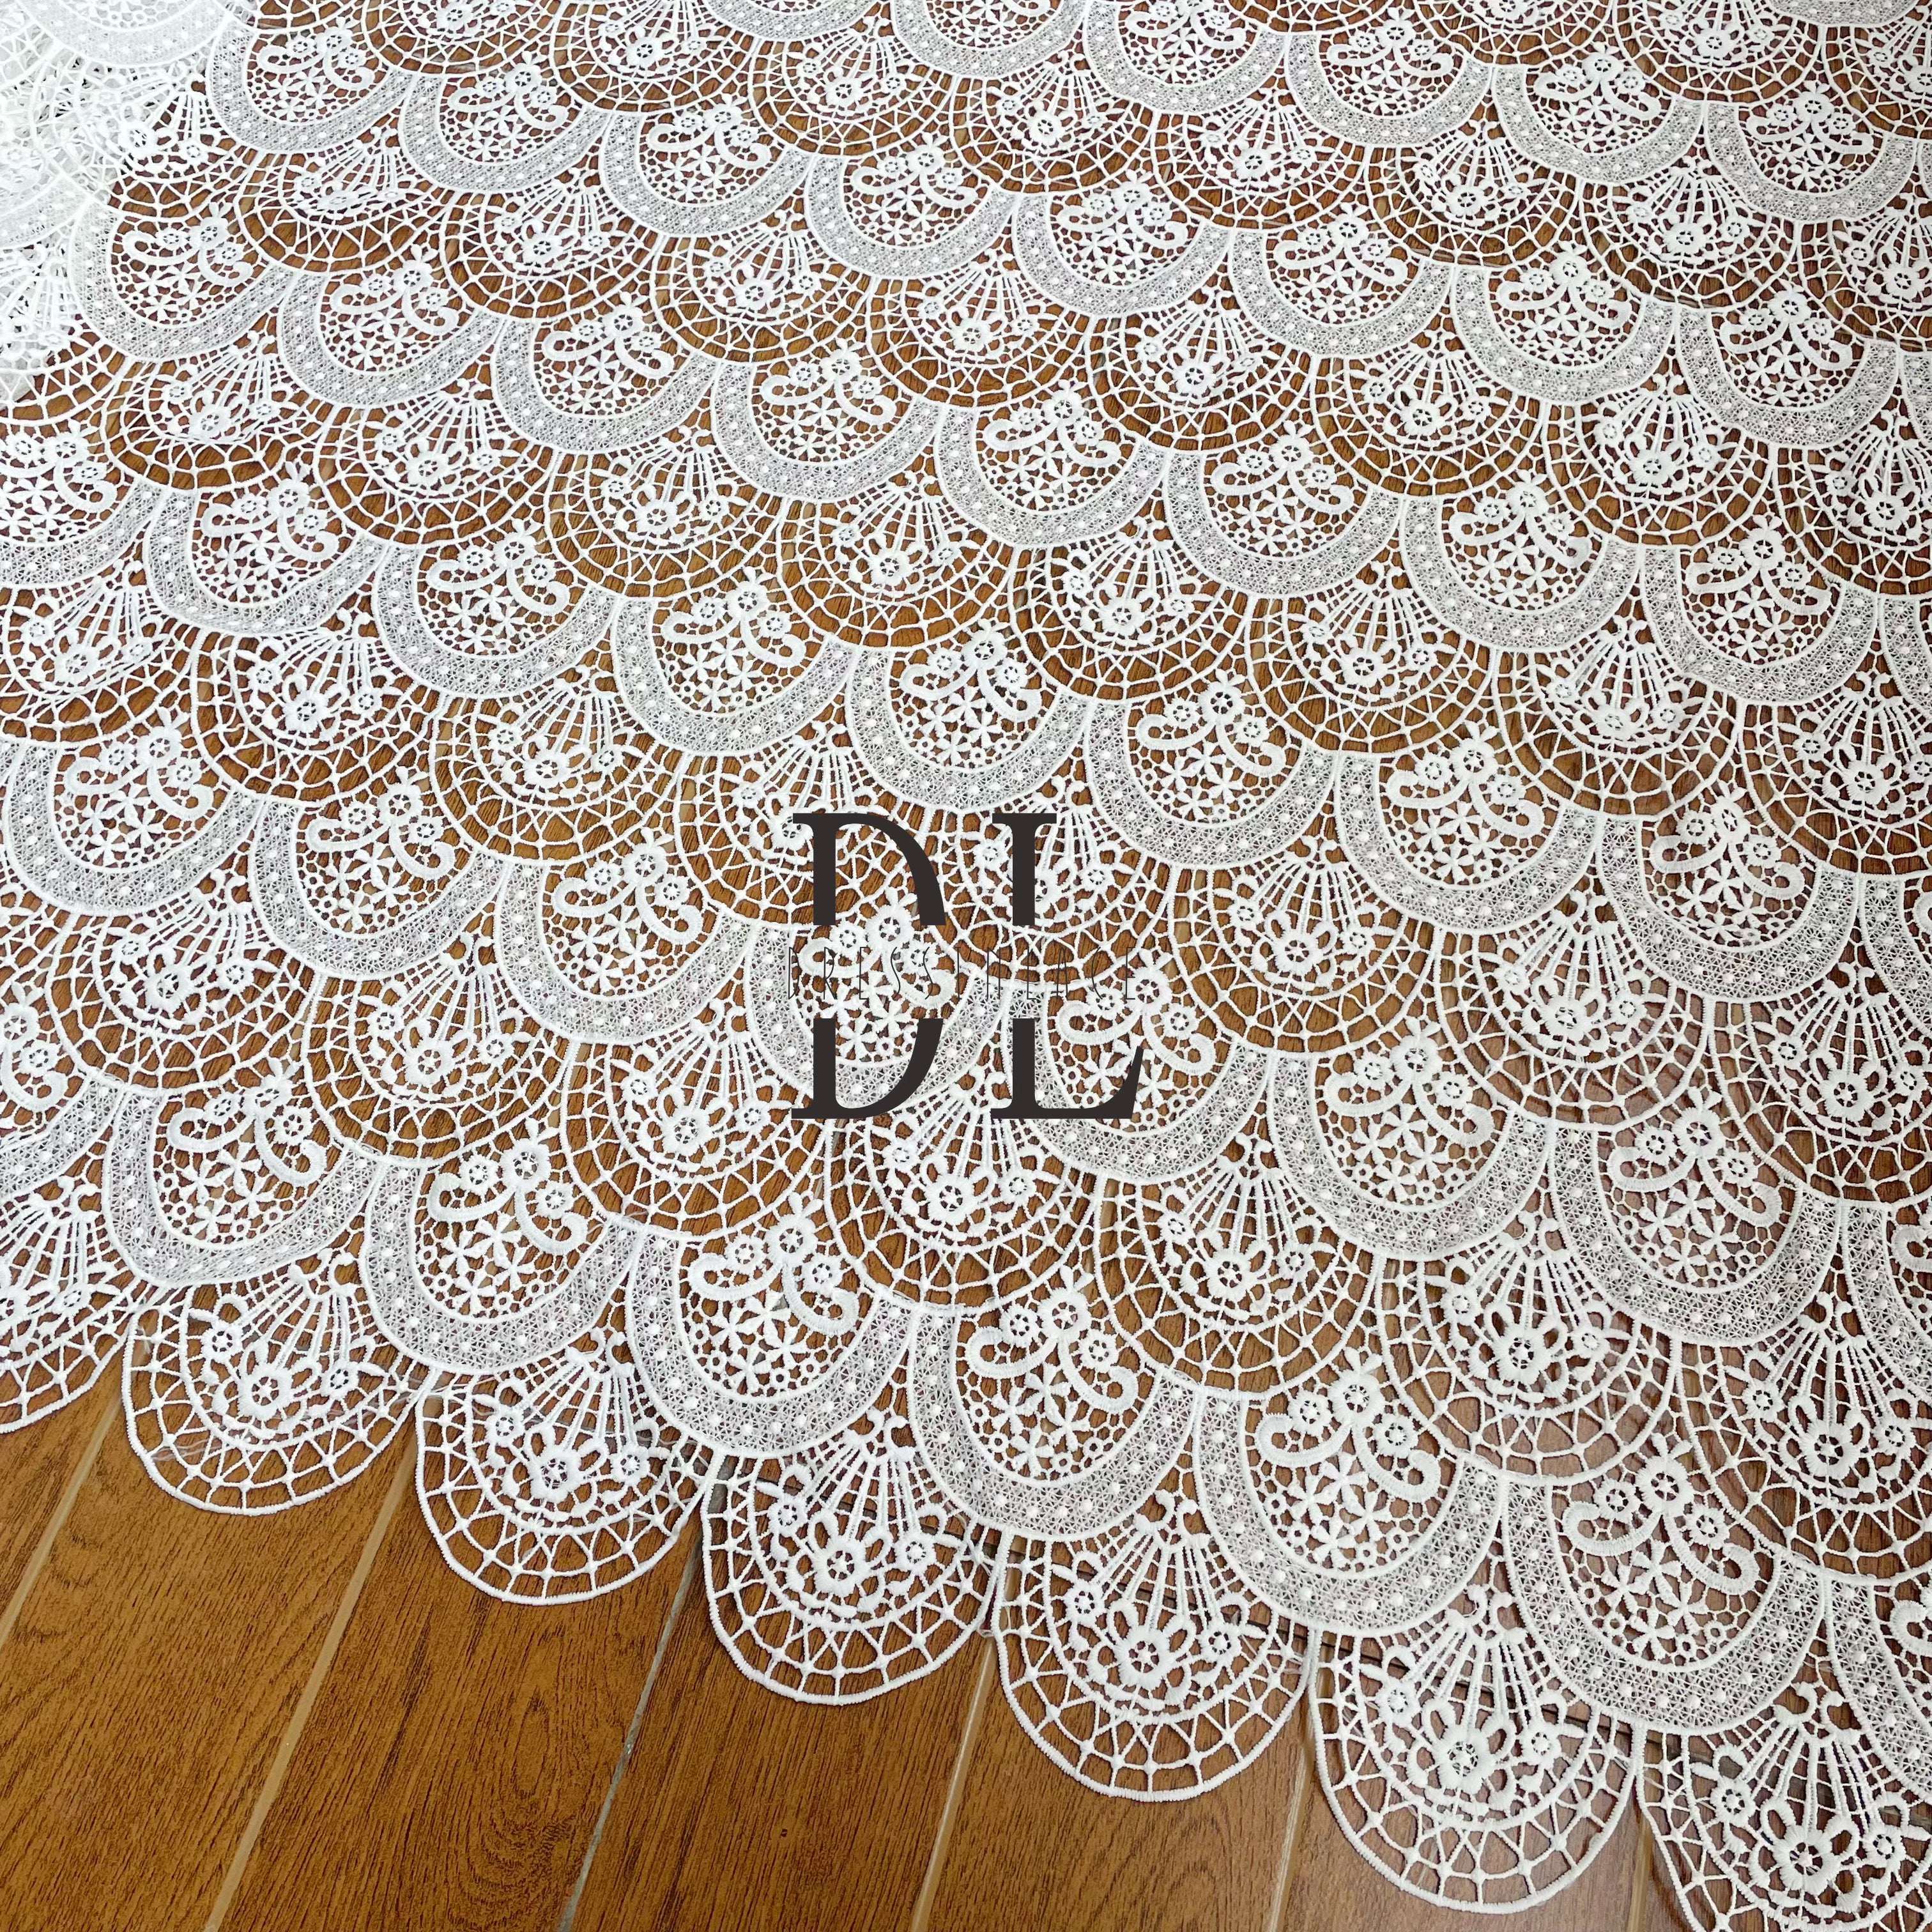 DLG120151 Classical Style Water Soluble Lace Fabric - Exquisite Lines Accentuate the Diverse Beauty of Lace - Perfect for Bridal Dresses DLG120151